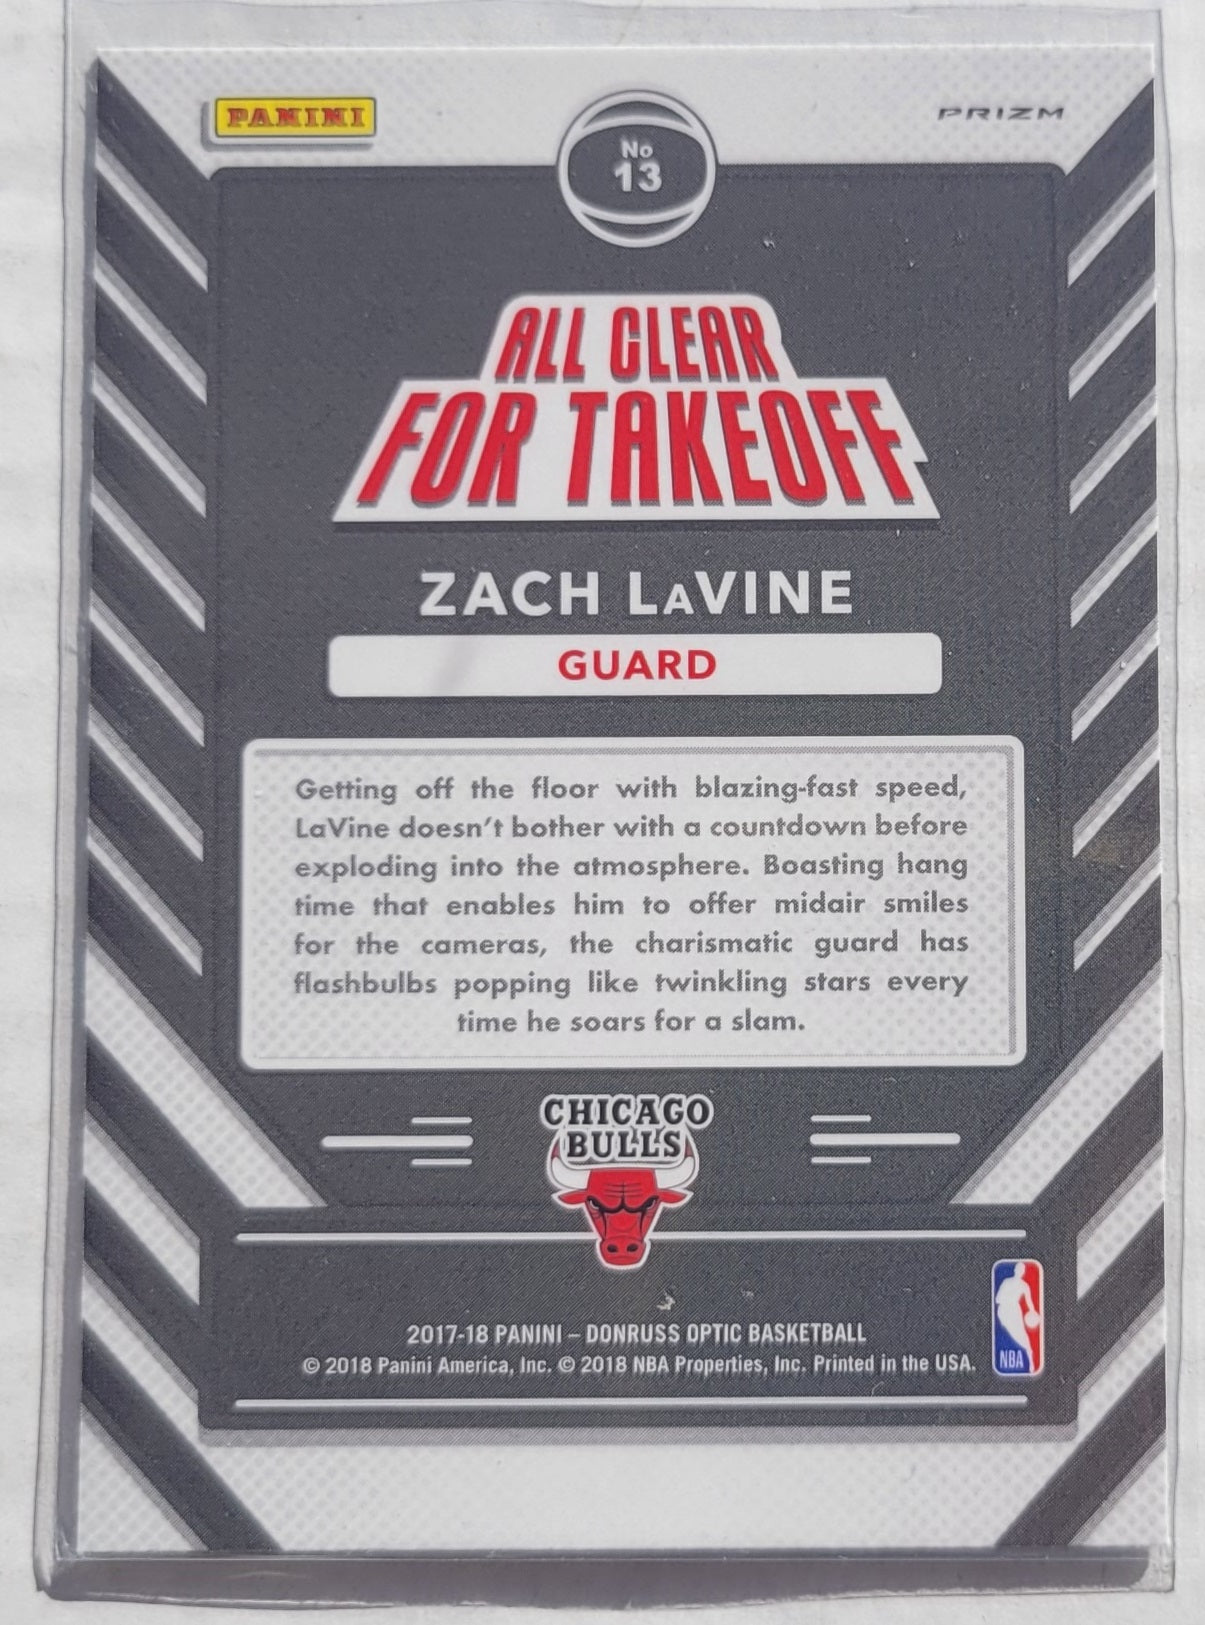 Zach LaVine - 2017-18 Donruss Optic All Clear for Takeoff Holo #13